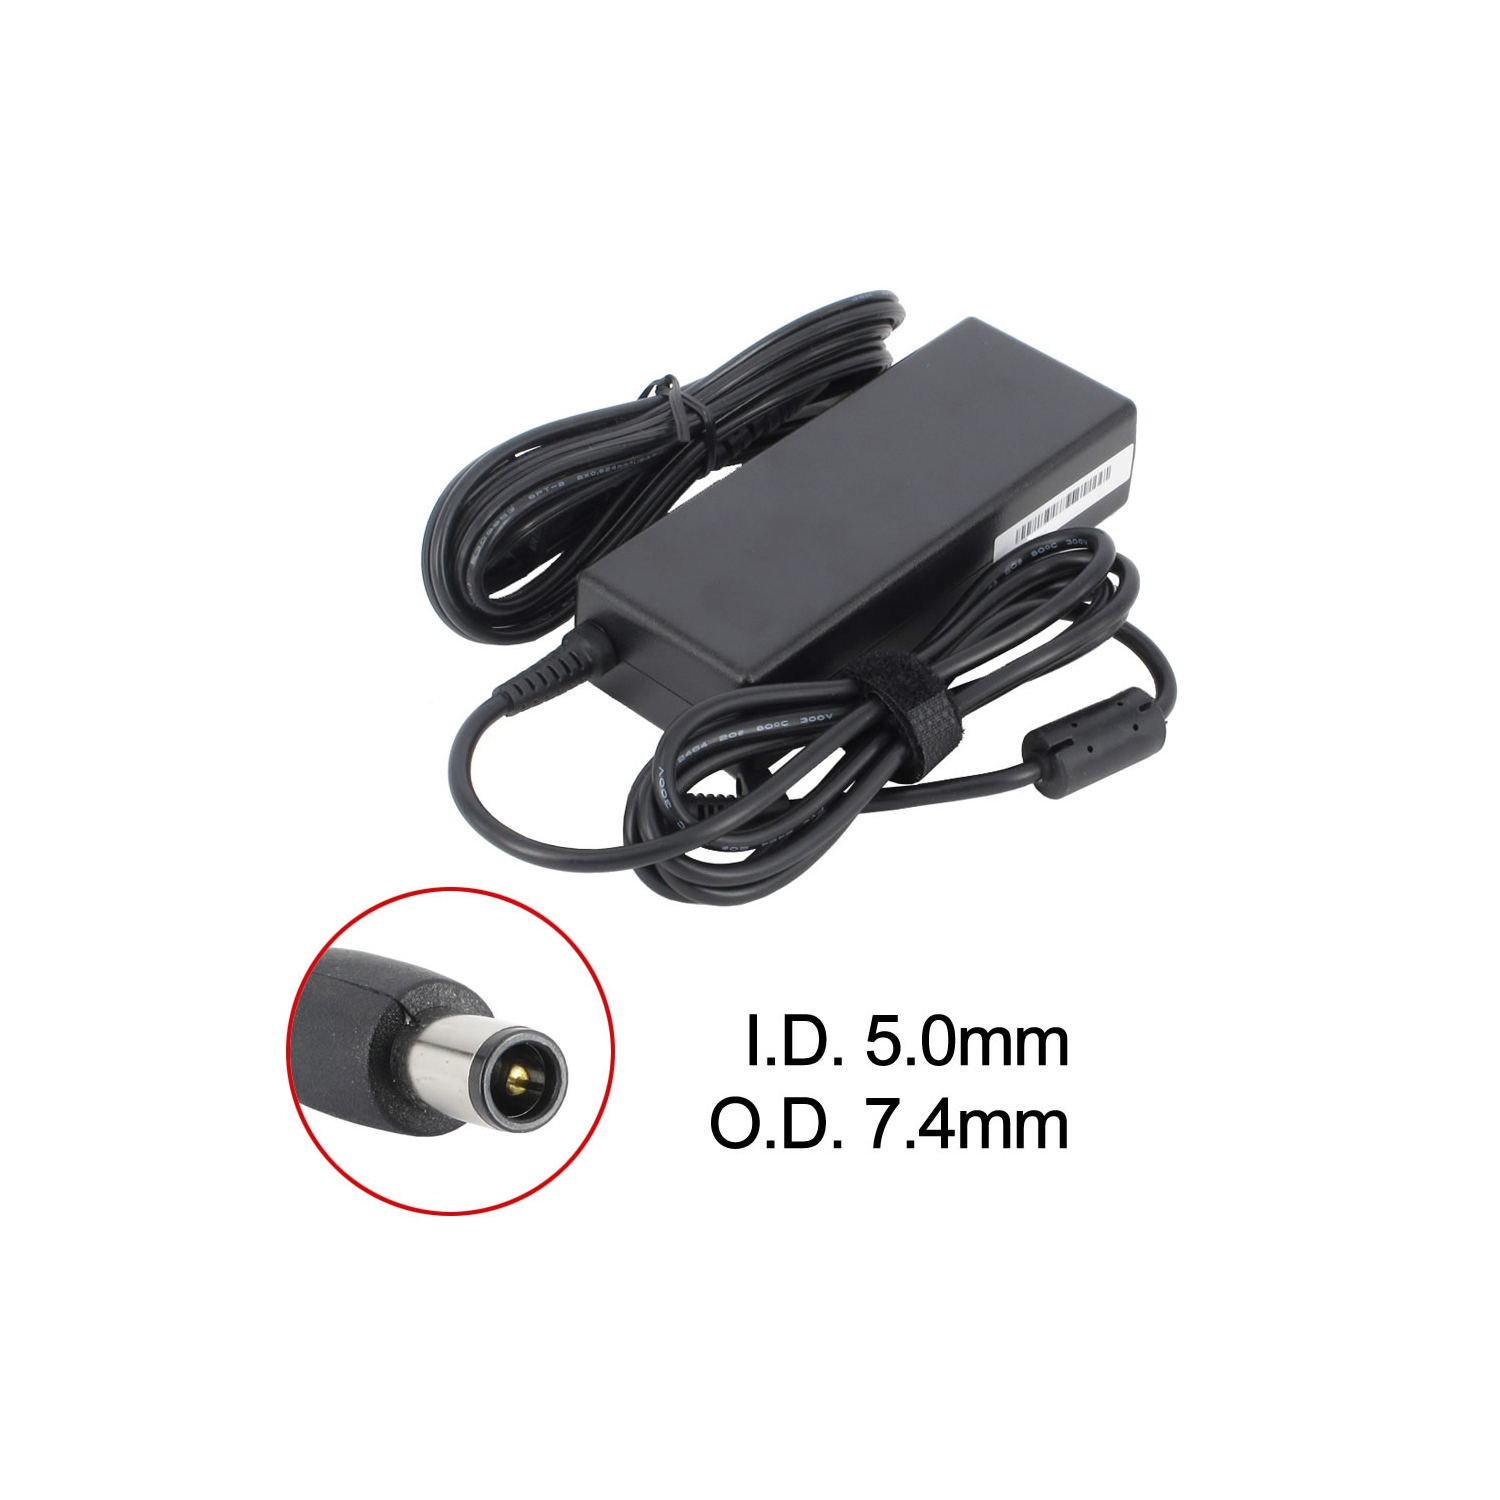 New Laptop AC Adapter for Dell Inspiron N5050, 0V0KR, 310-7701, 312-0596, 610-3399, DA65NM133, FF313, ORM617, WK890